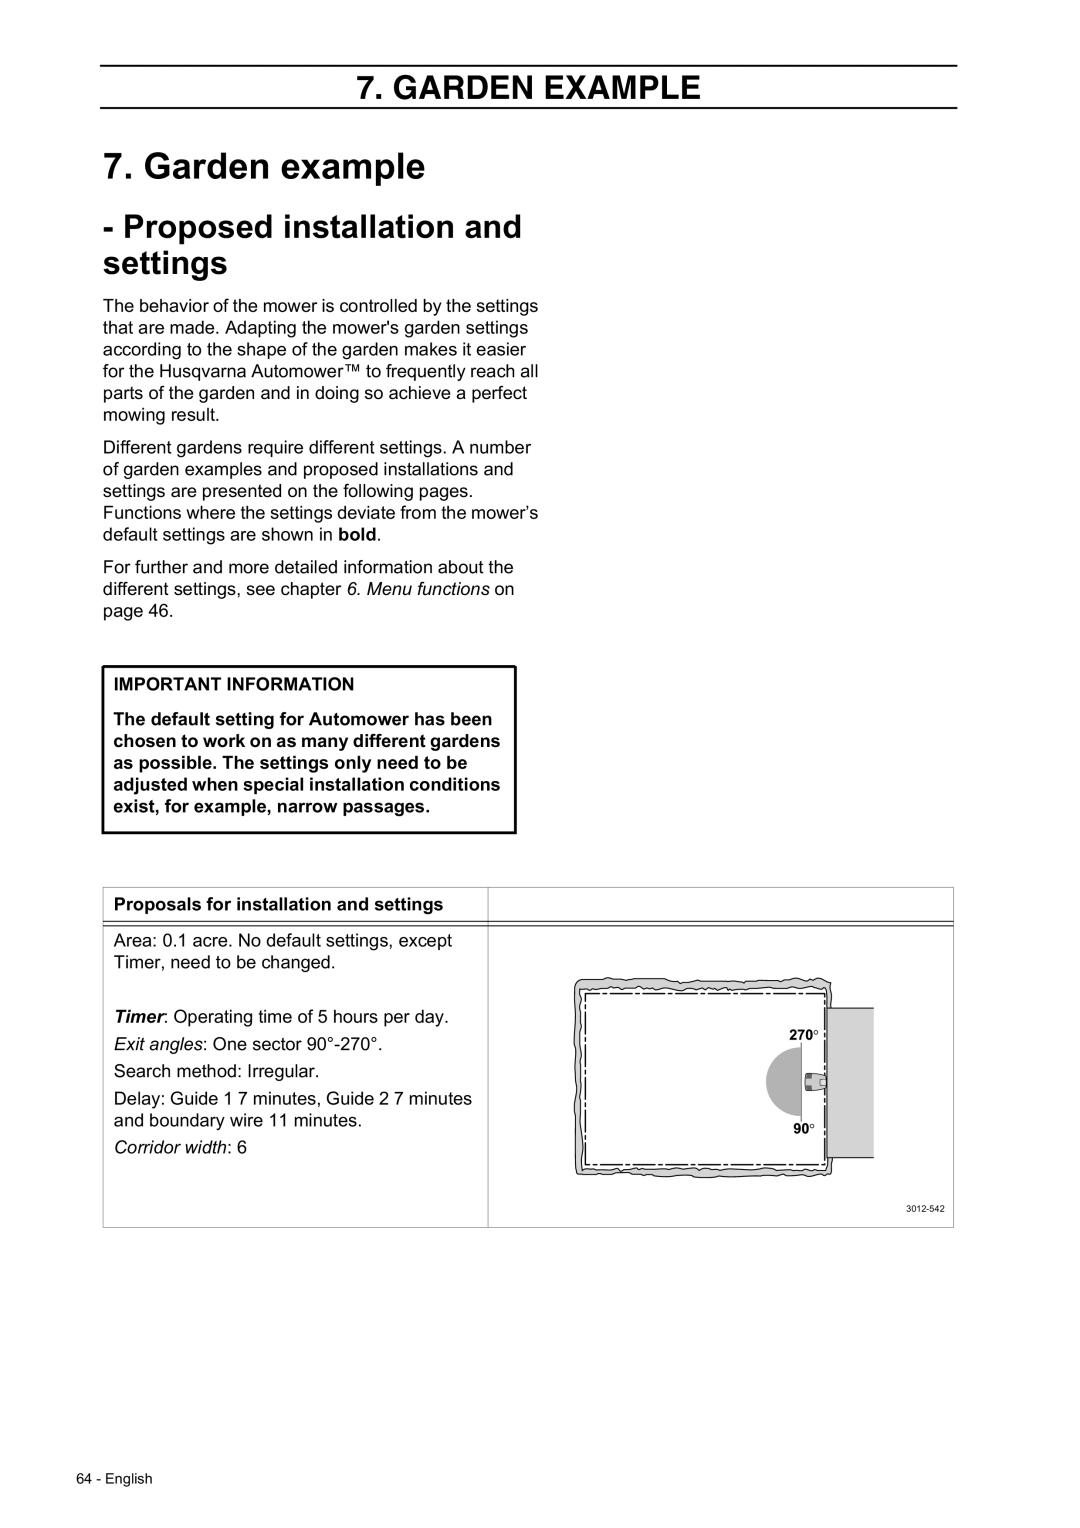 Husqvarna 230 ACX/220 AC Garden example, Garden Example, Proposals for installation and settings, Important Information 